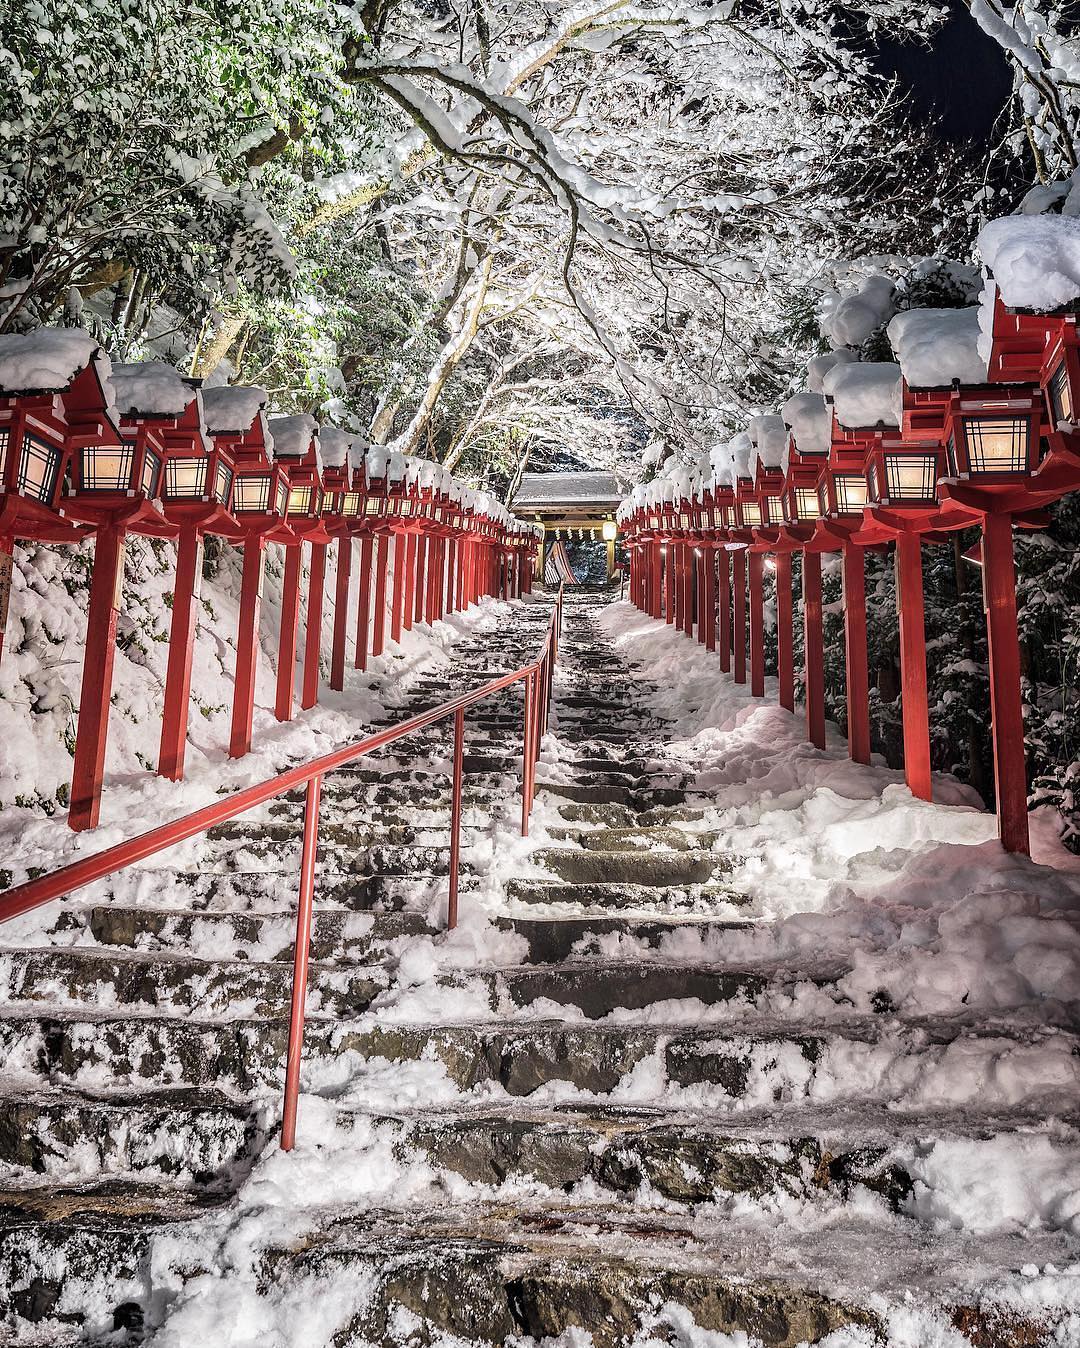 @Japan Travel: Here's a zen place brought to you by @etsuyo623! Kifune ...